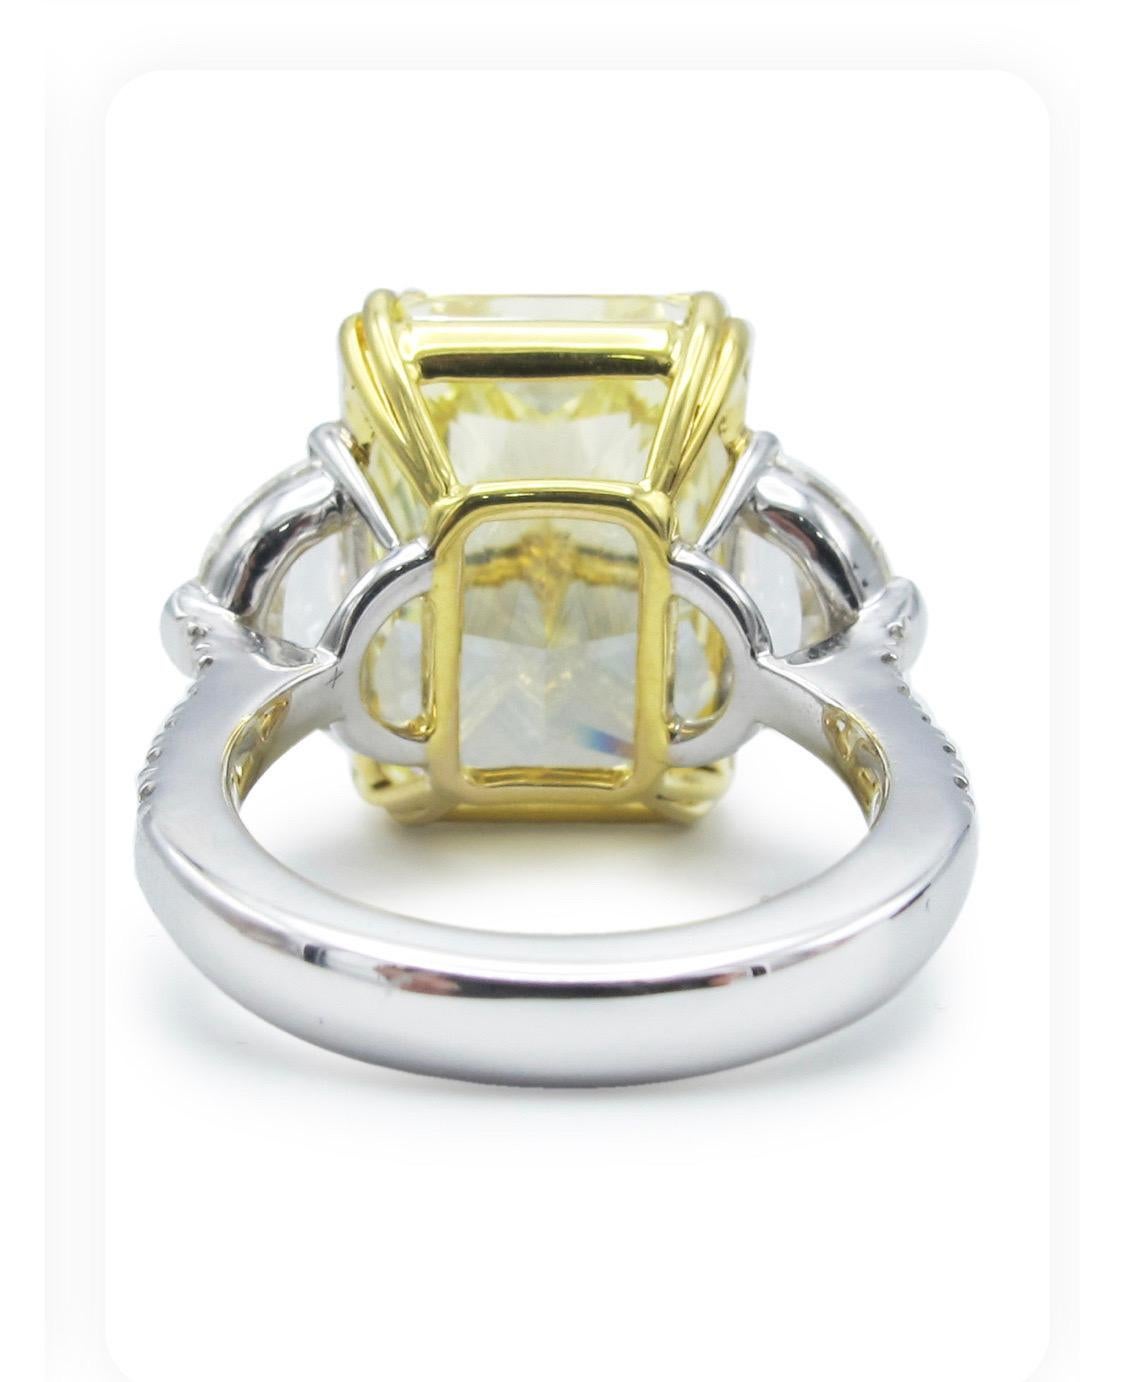 Emilio Jewelry Gia Certified 19.00 Carat Fancy Intense Yellow Diamond Ring  In New Condition For Sale In New York, NY